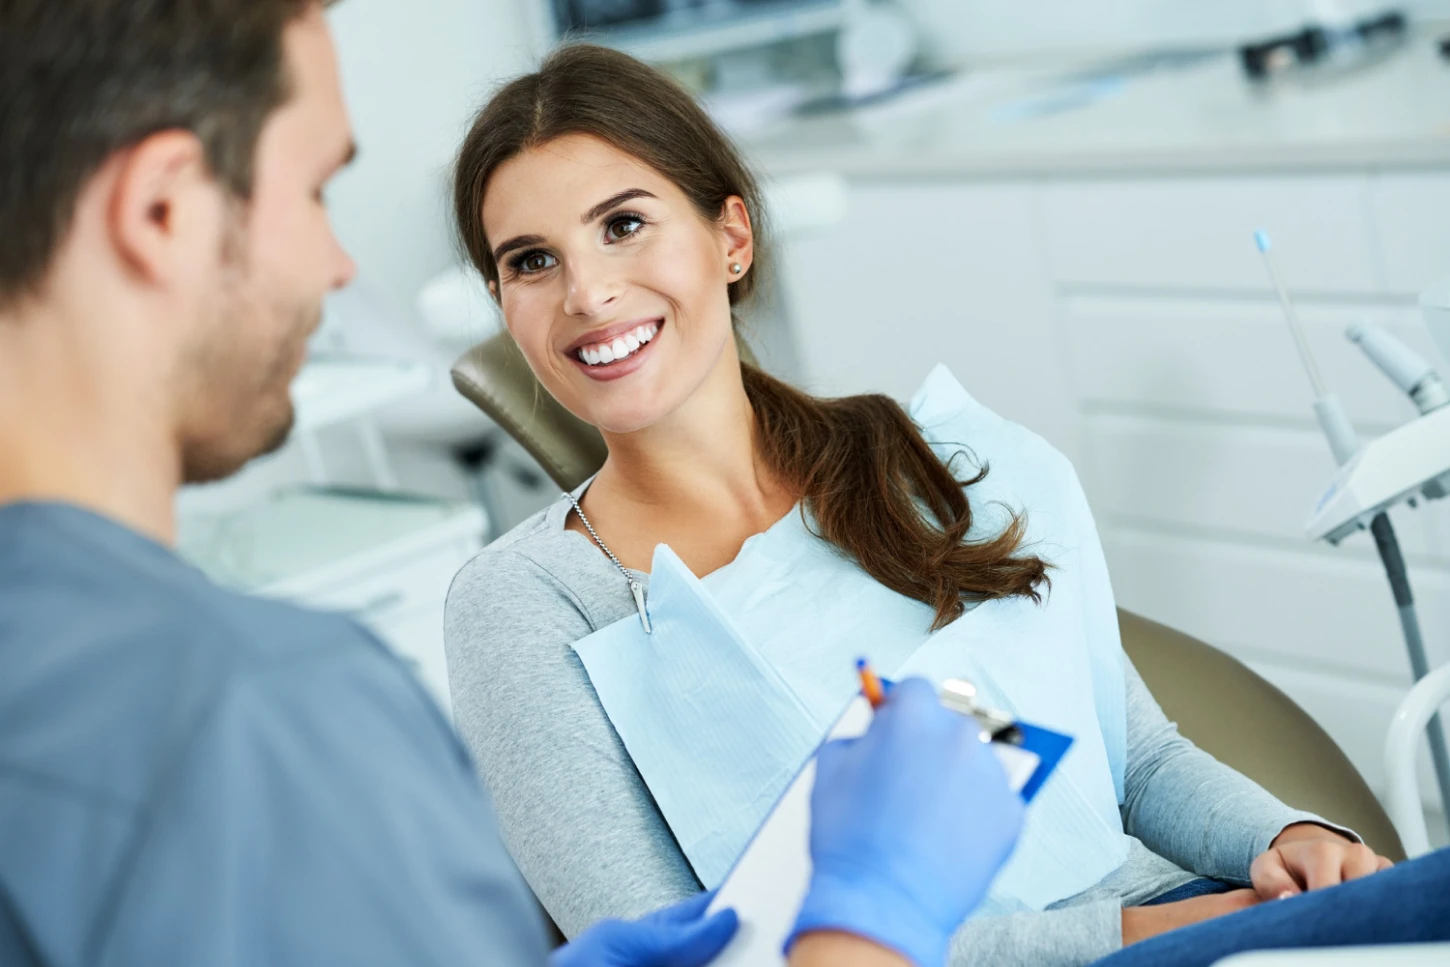 Smiling woman being attended by a dentist.